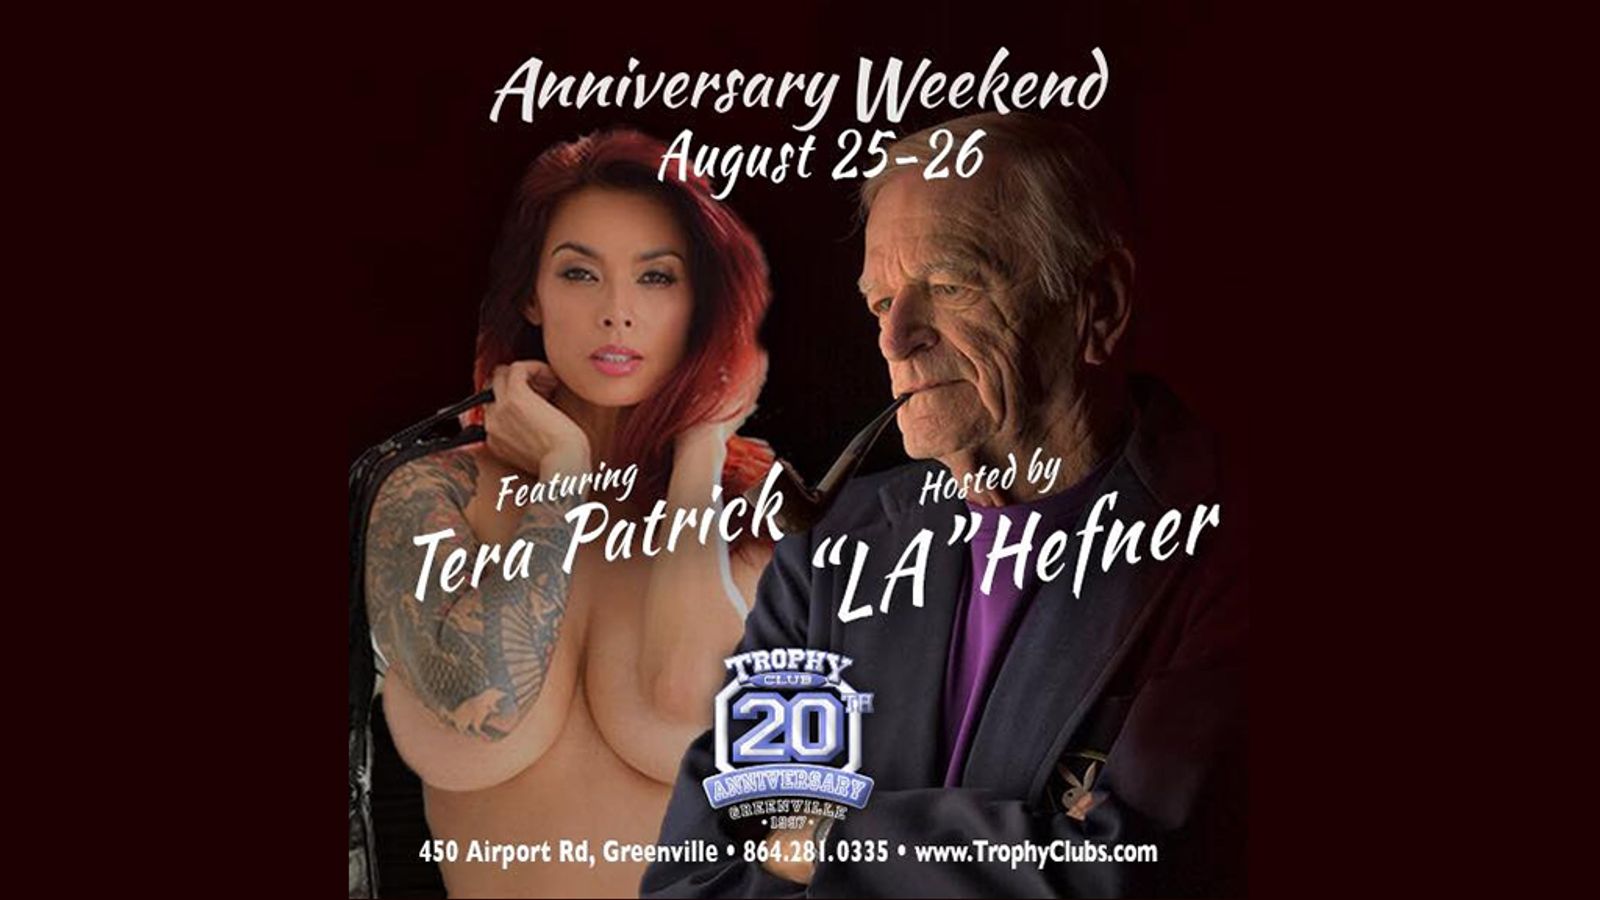 Tera Patrick To Feature At The Trophy Club In Greenville, SC